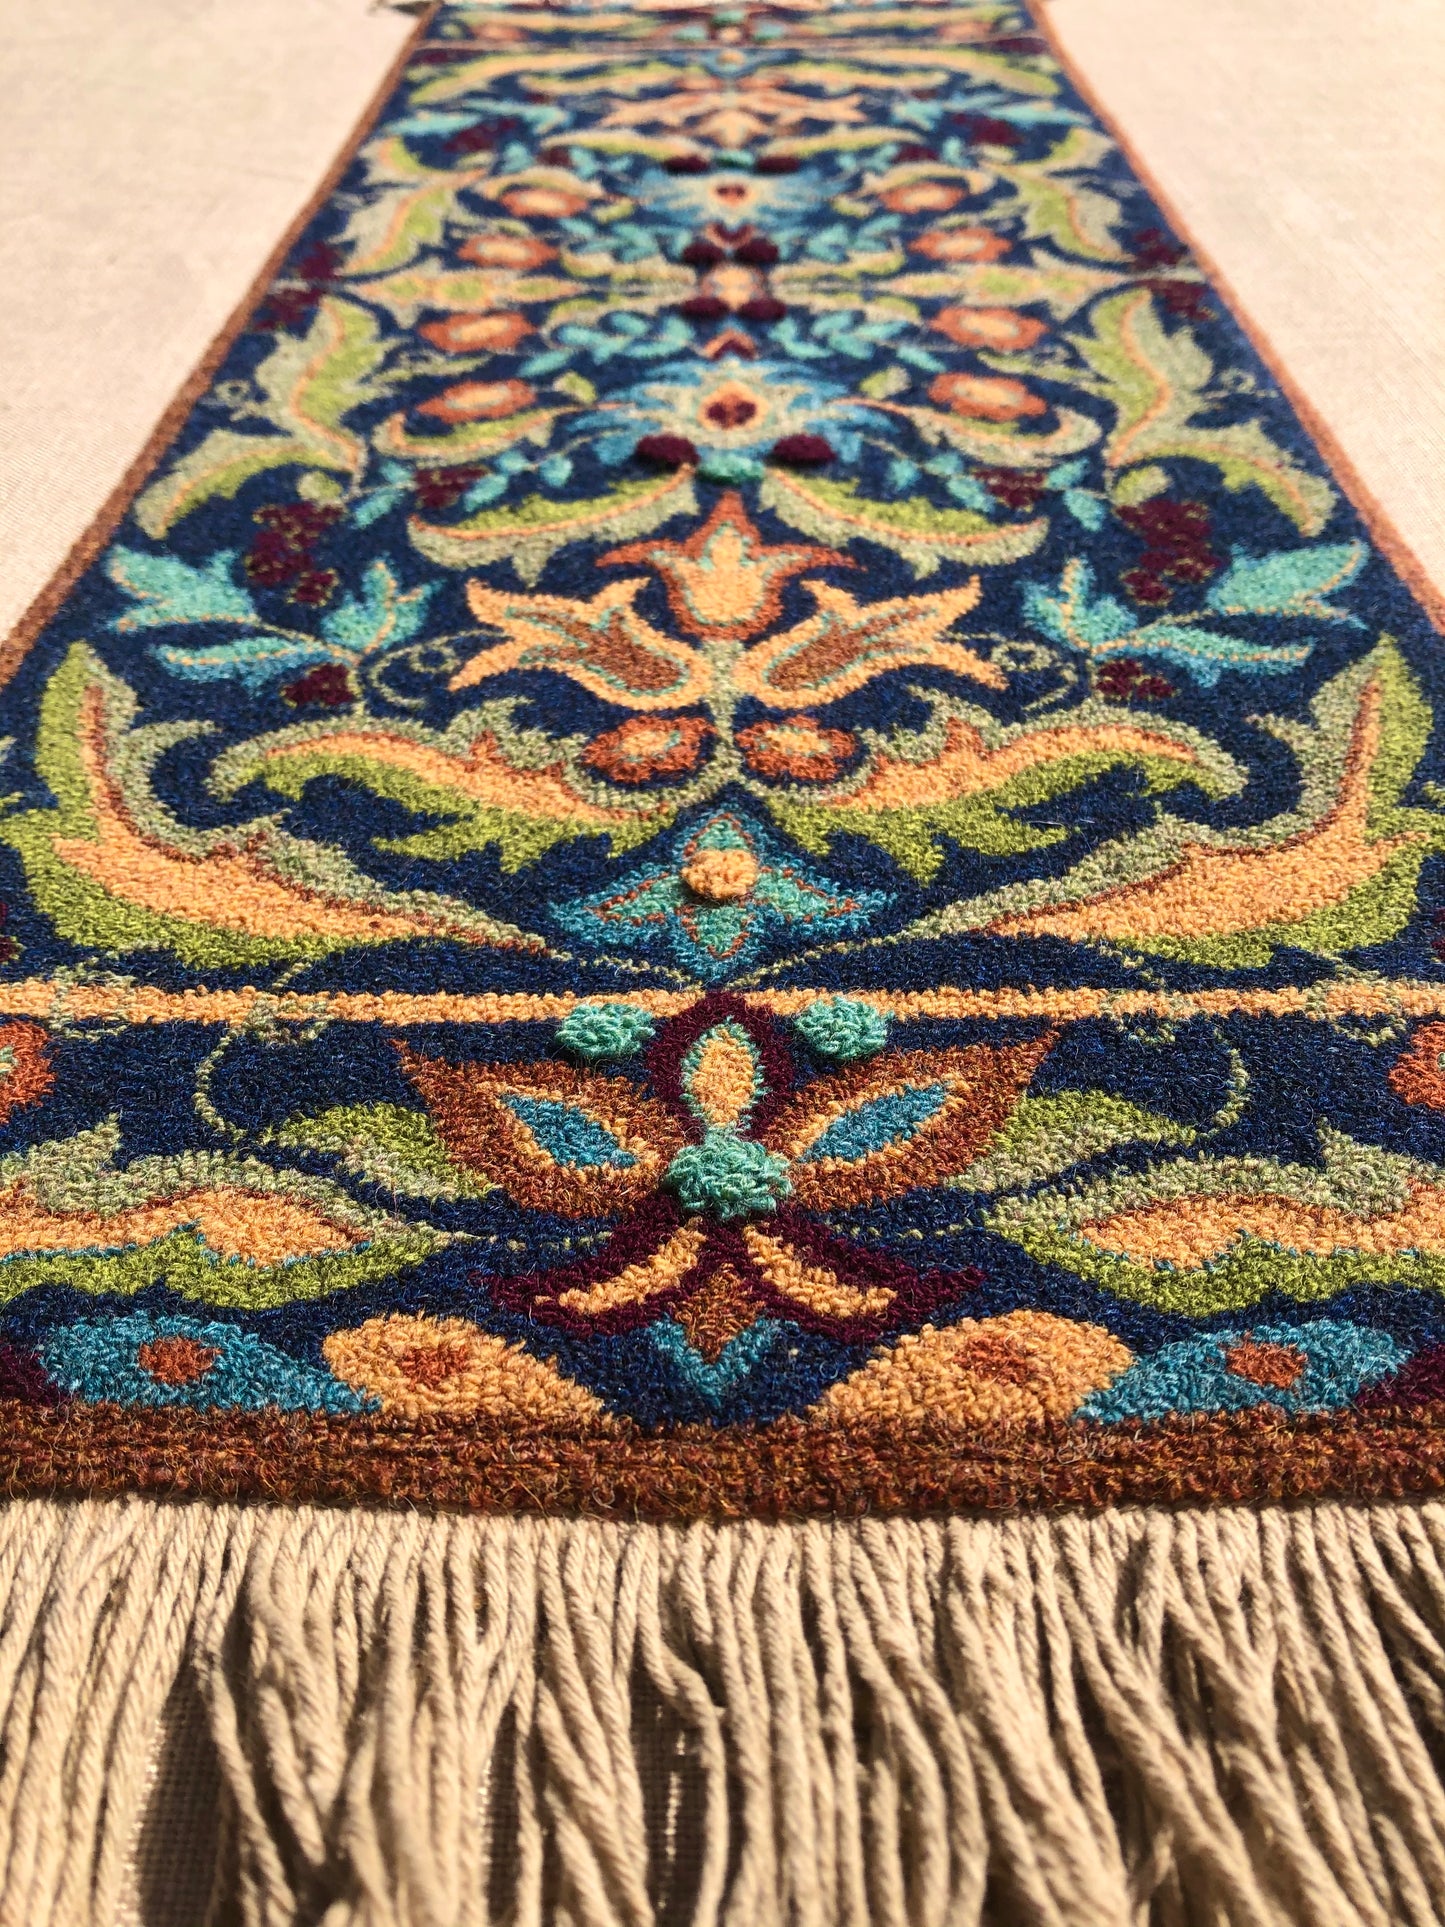 Tapestry Runner-PDF Digital Download Punch Needle Pattern by Orphaned Wool. This incredible runner pattern include a full-color placement guide that will give you three options of threads to use , Rustic Moire Wool Threads, Valdani Threads, along with DMC Floss. Each type will bring a beautiful finish to this Tapestry Runner pattern. The photos of this design are showing the pattern finished in Rustic Moire Wool Threads